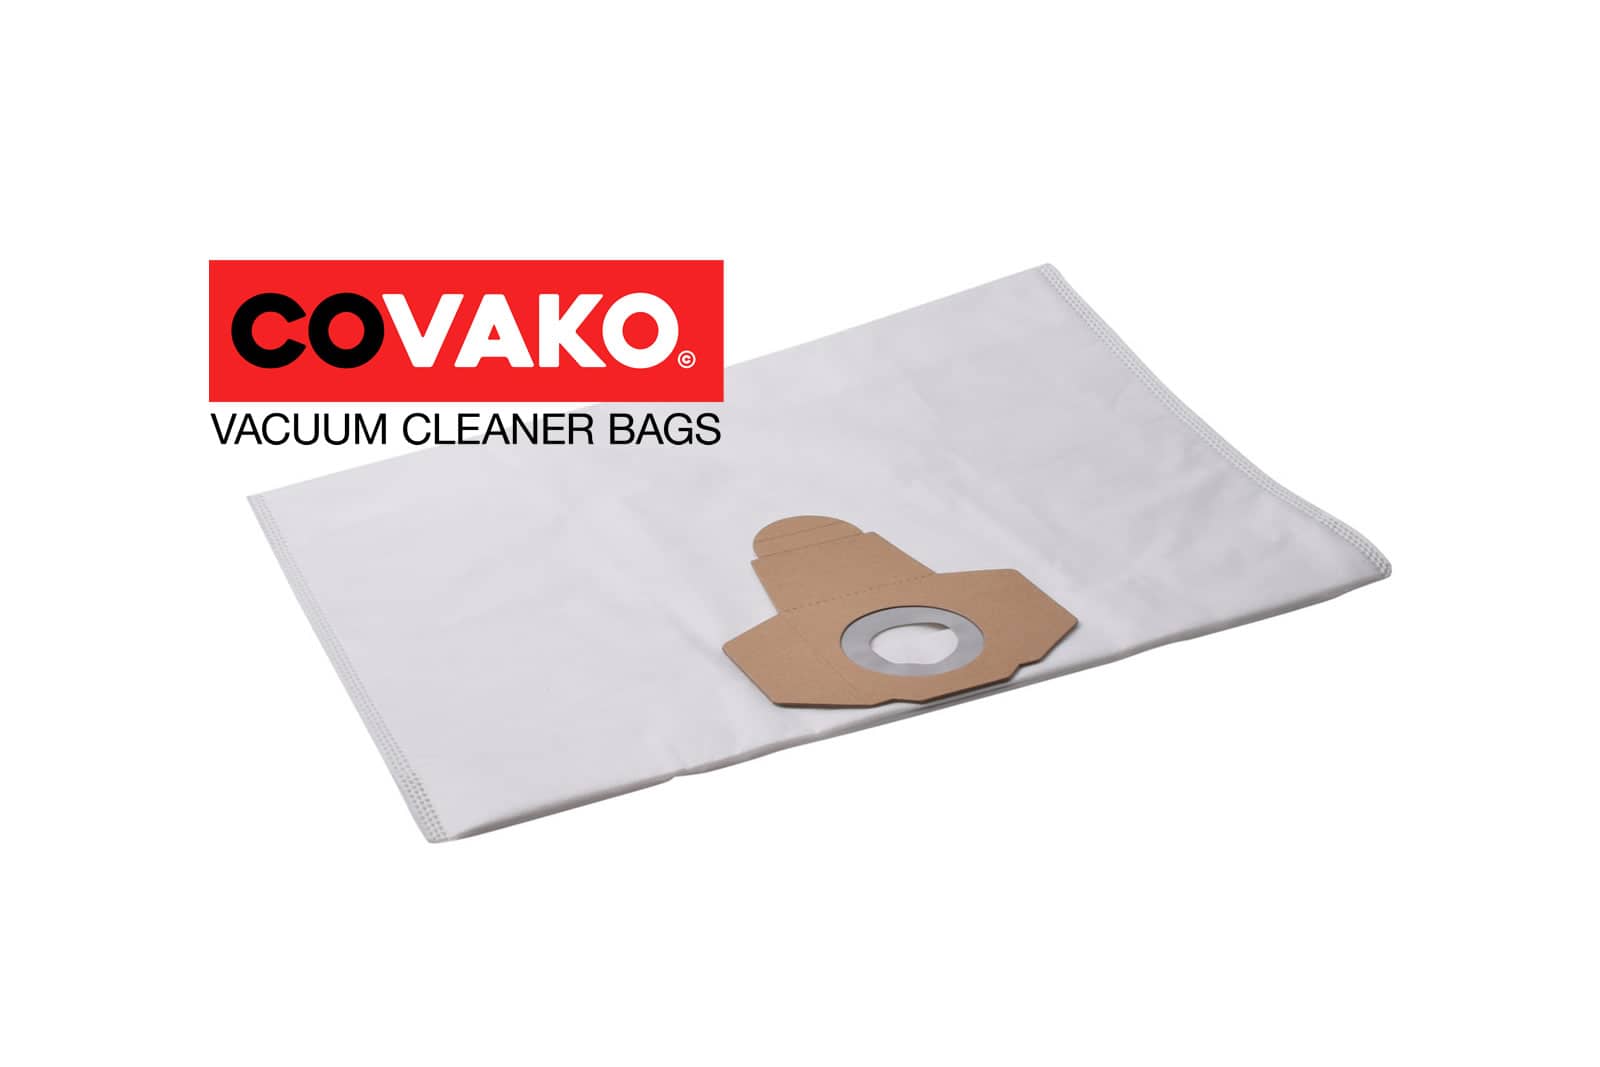 Einhell TH-VC 1815 / Synthesis - Einhell vacuum cleaner bags